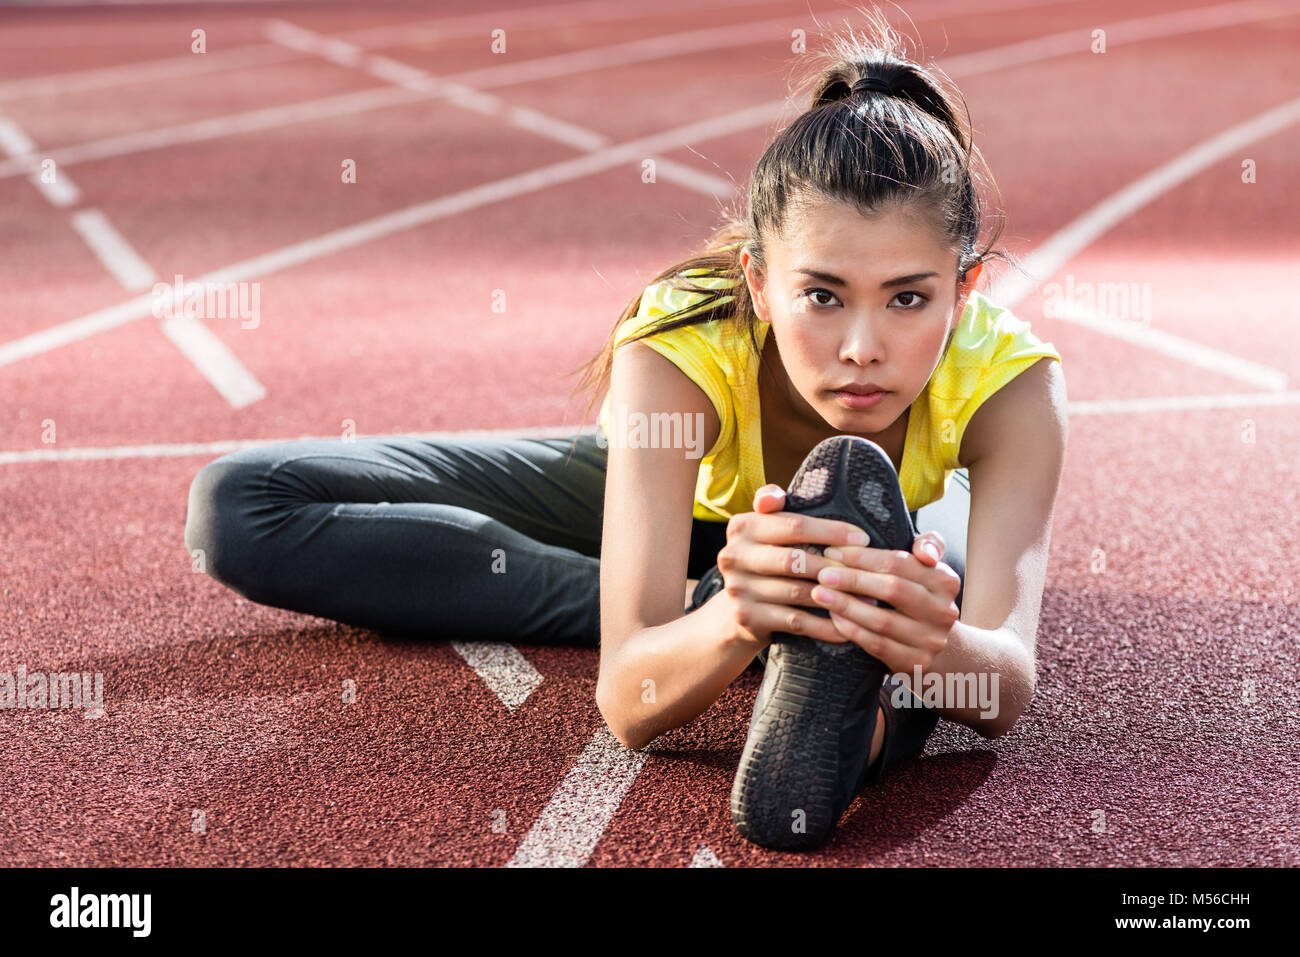 woman athlete stretching on racing track before sprint Stock Photo